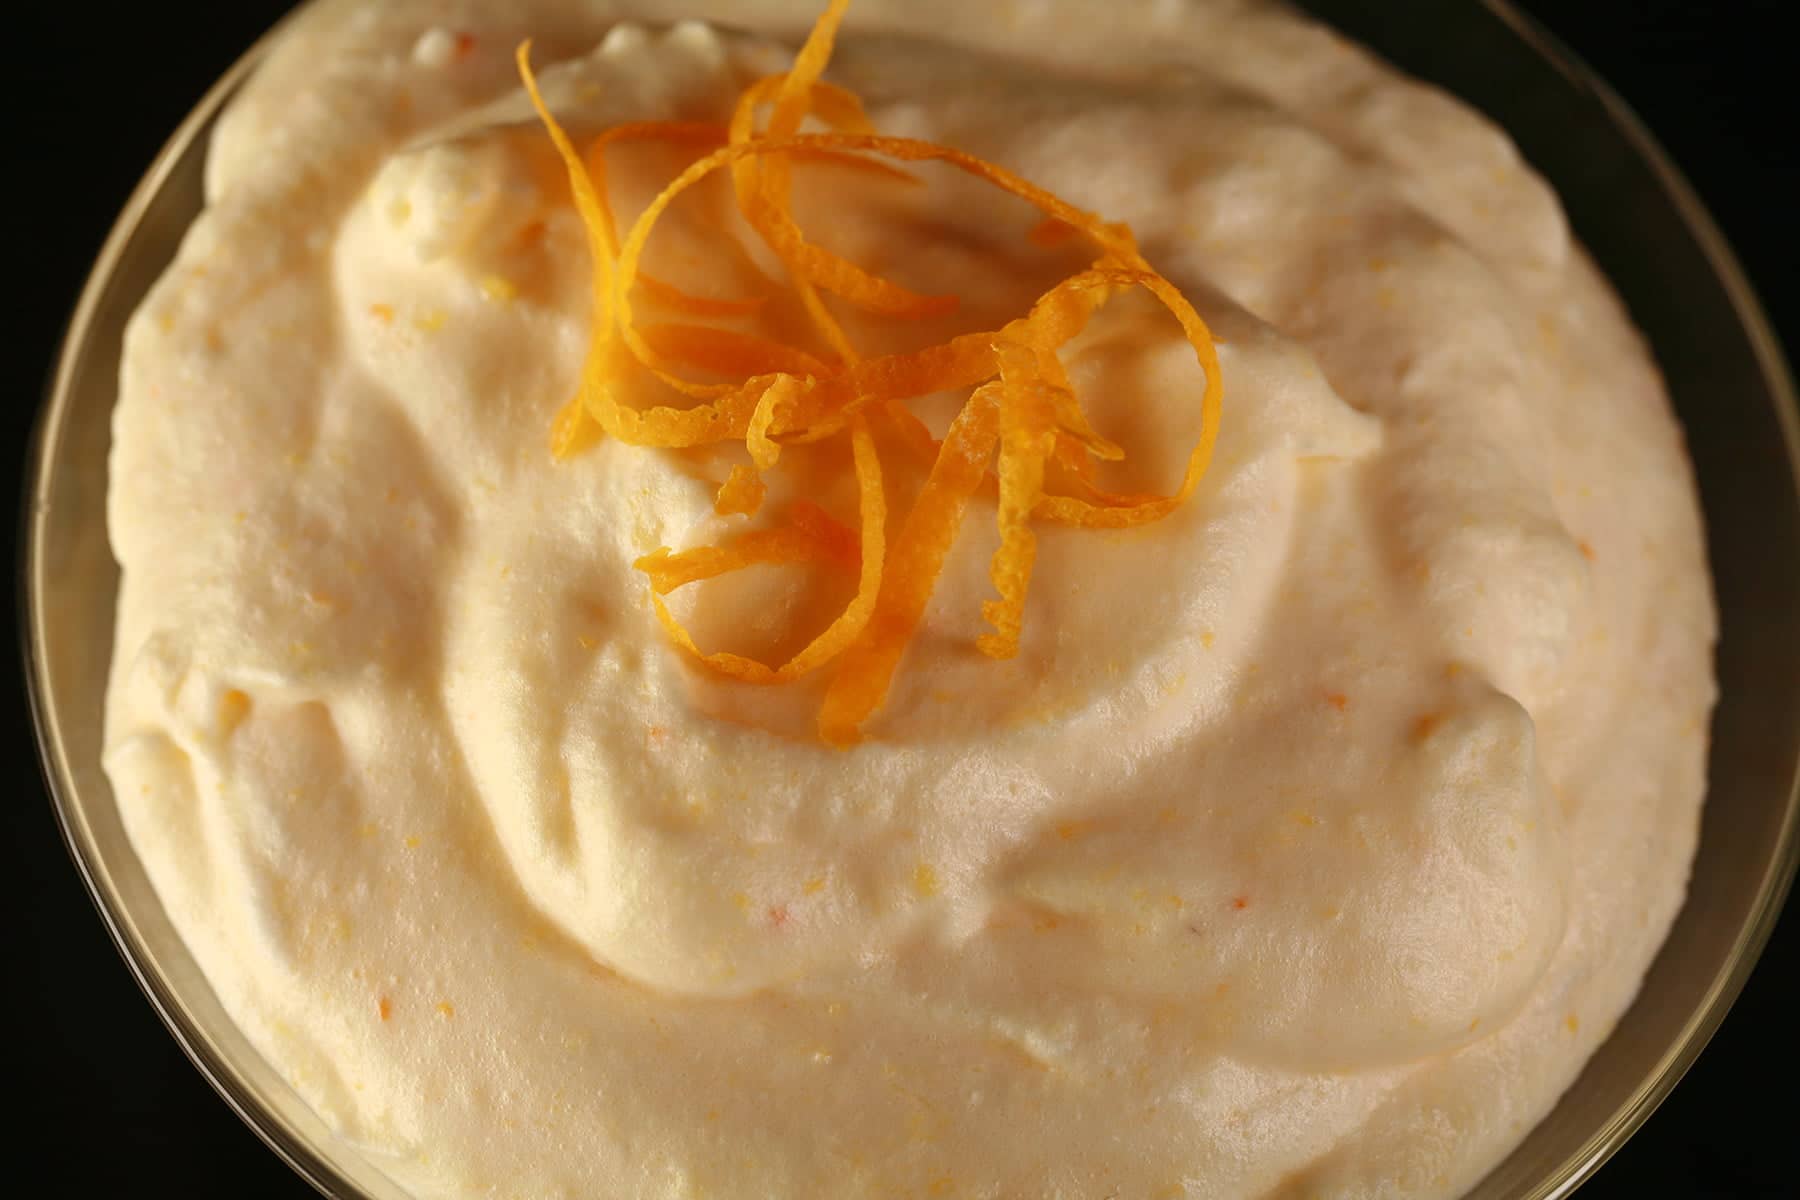 A very close up view of lightly orange coloured mousse. It has a small mound of clementine zest twists piled in the middle.